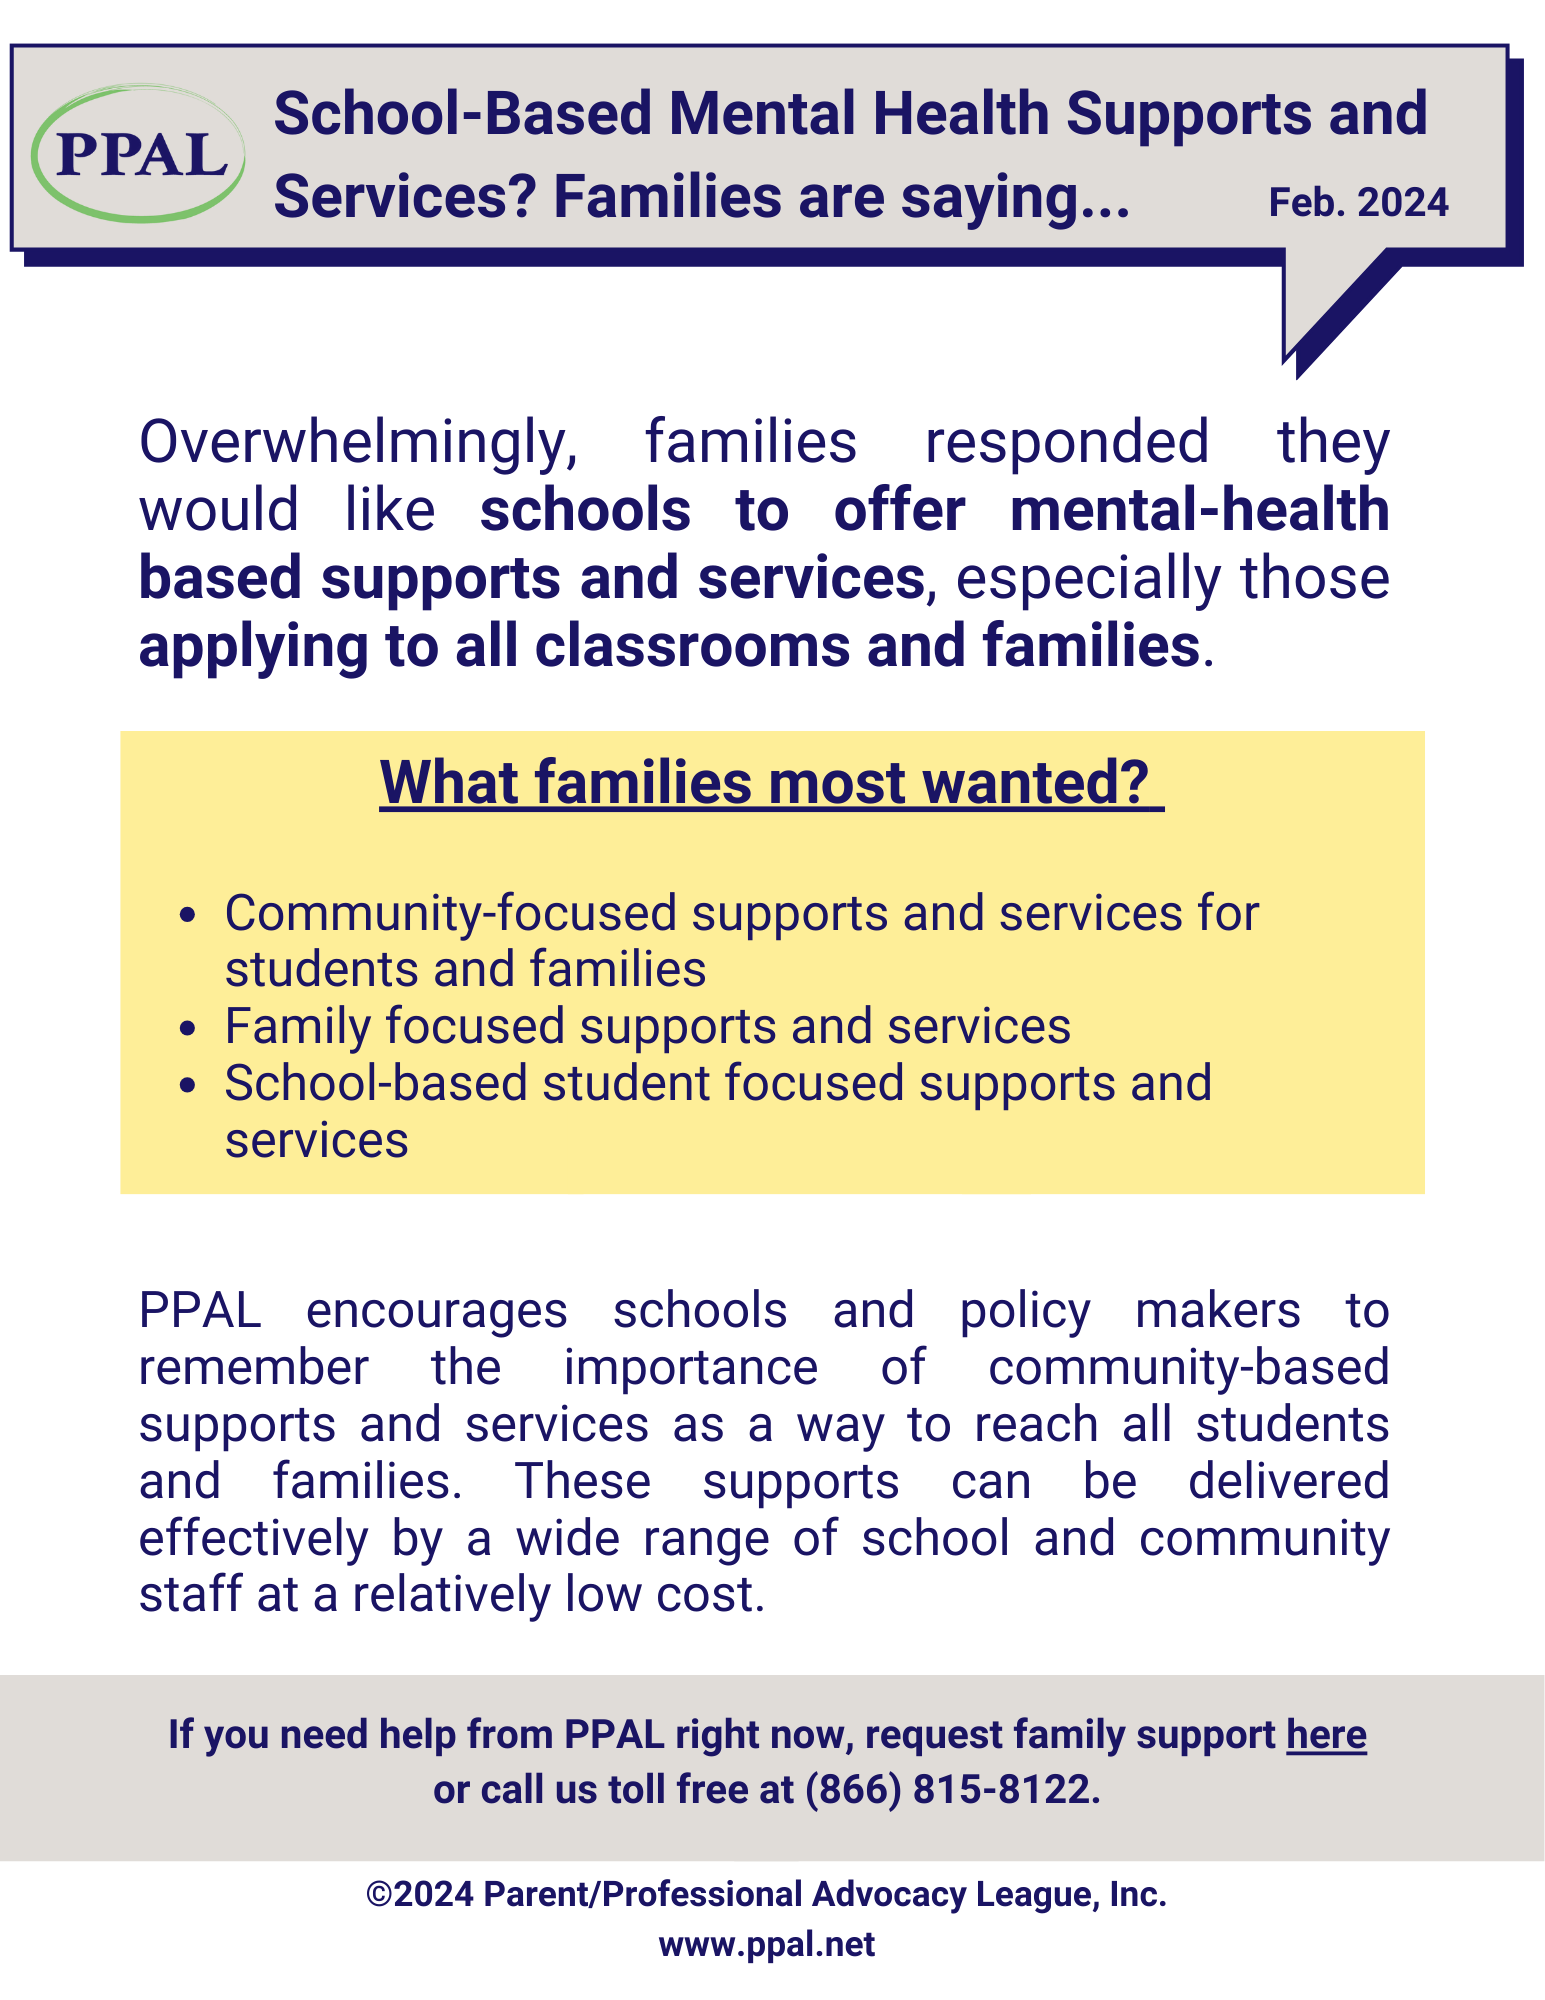 School-Based Mental Health Supports